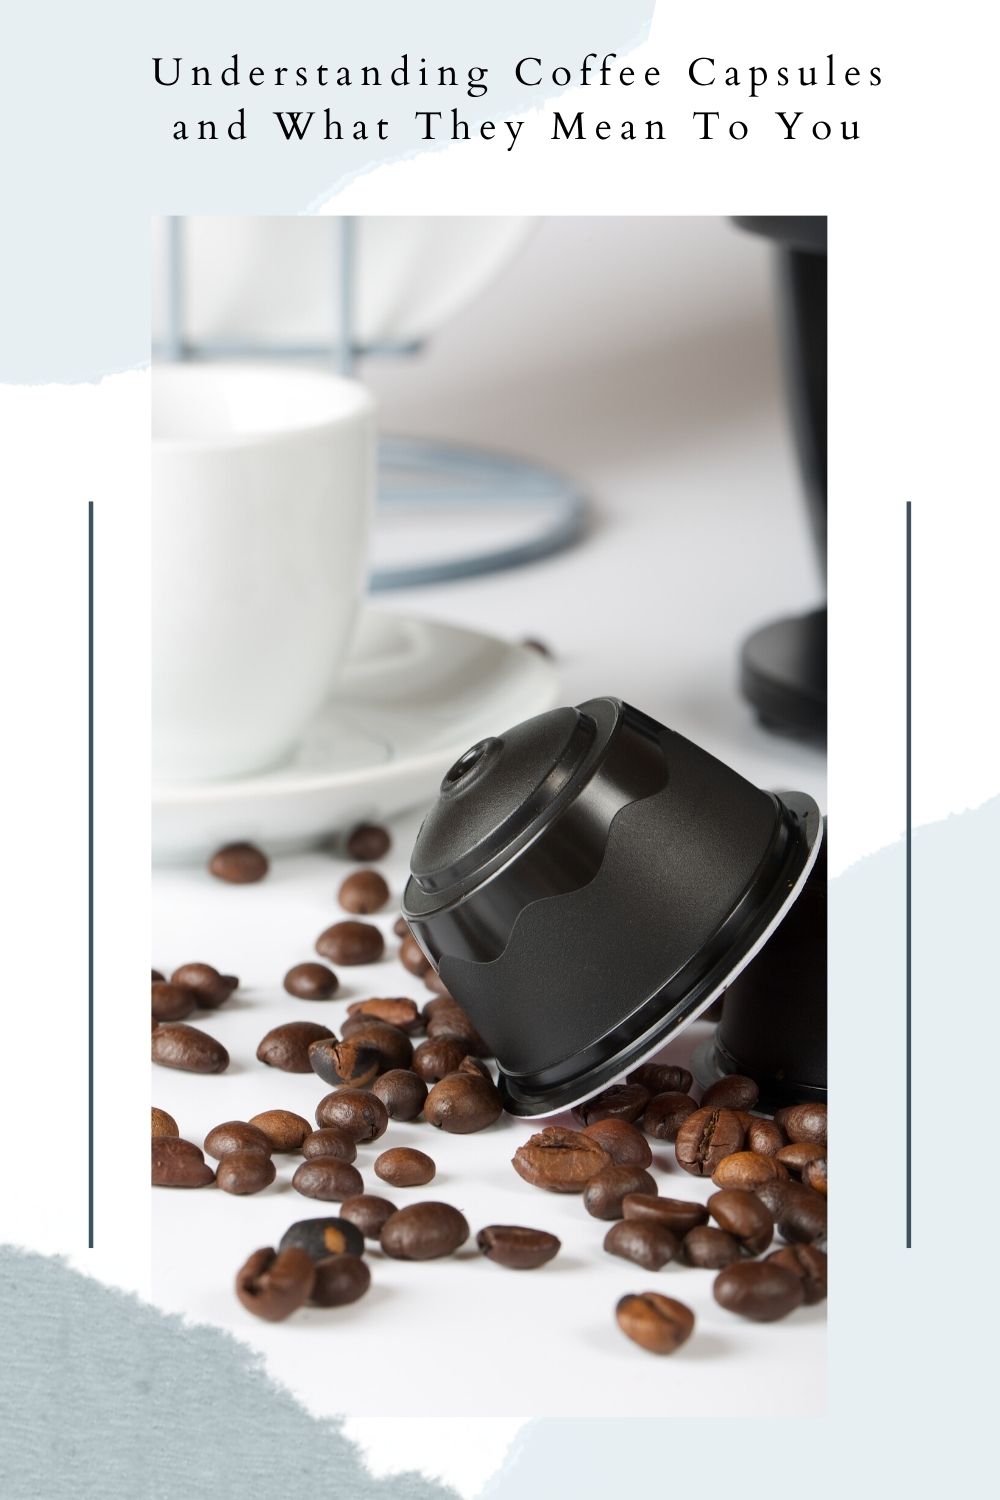 Understanding Coffee Capsules and What They Mean To You